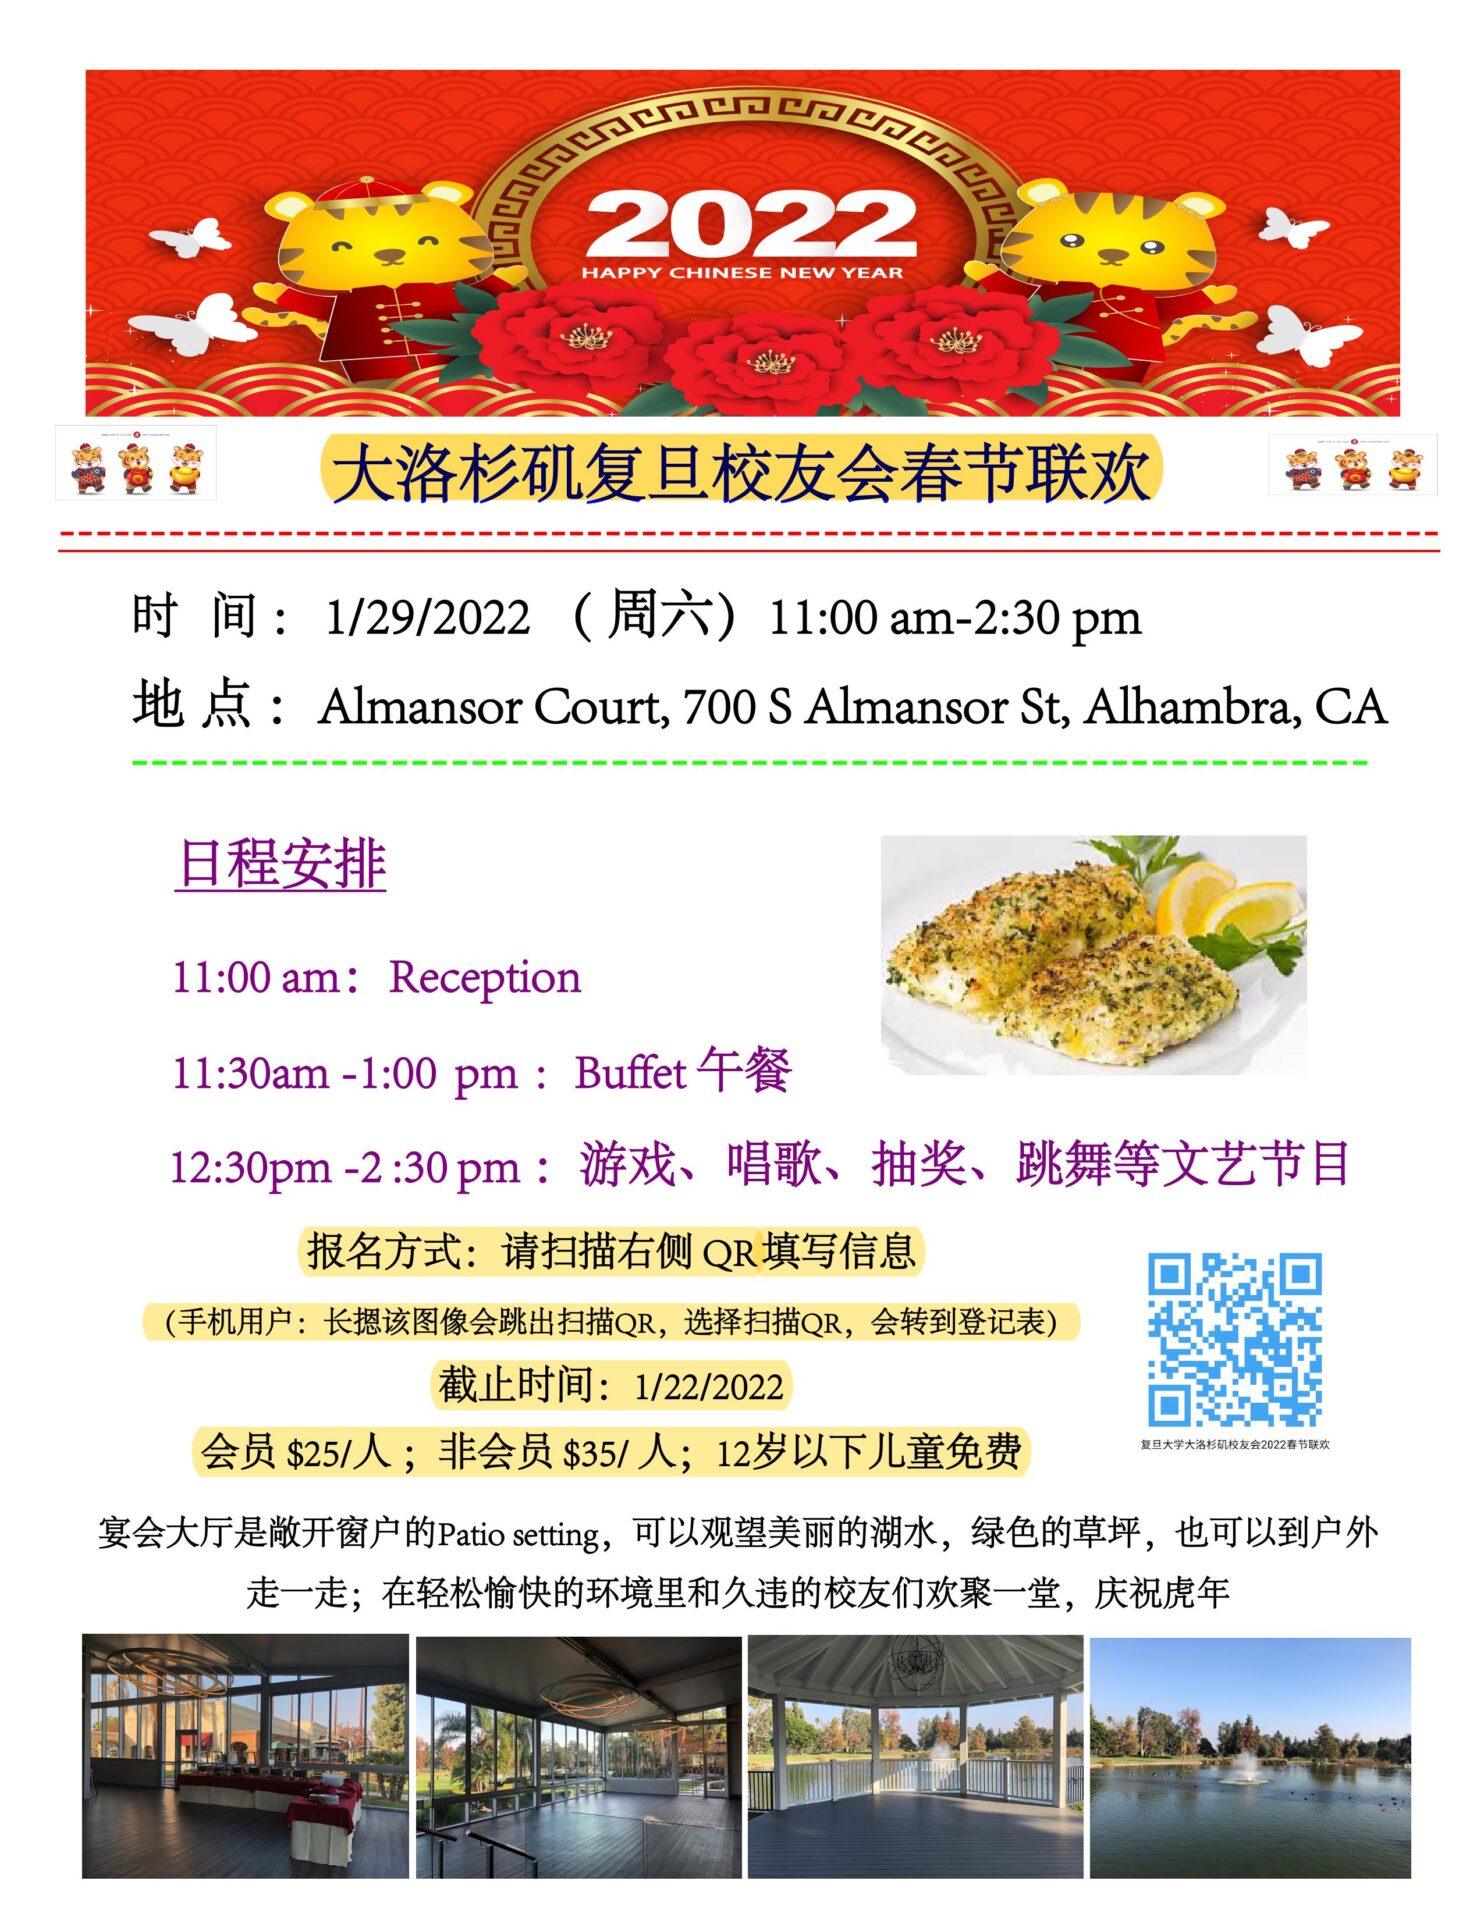 A flyer for chinese new year celebration.